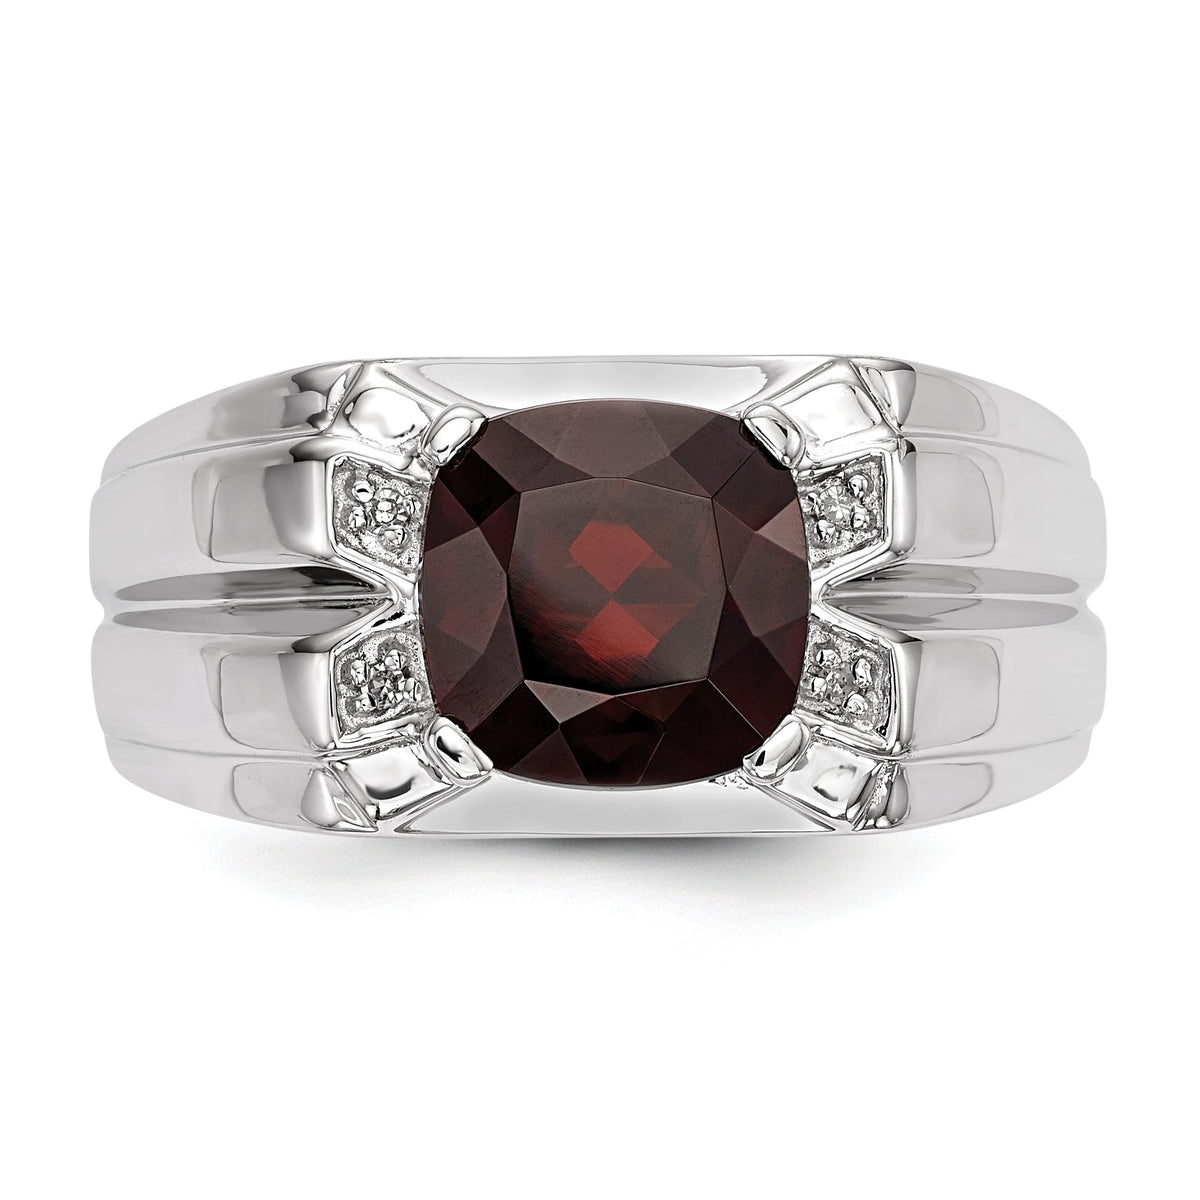 Alternate view of the Cushion Cut Garnet &amp; Diamond Tapered Ring in Sterling Silver by The Black Bow Jewelry Co.